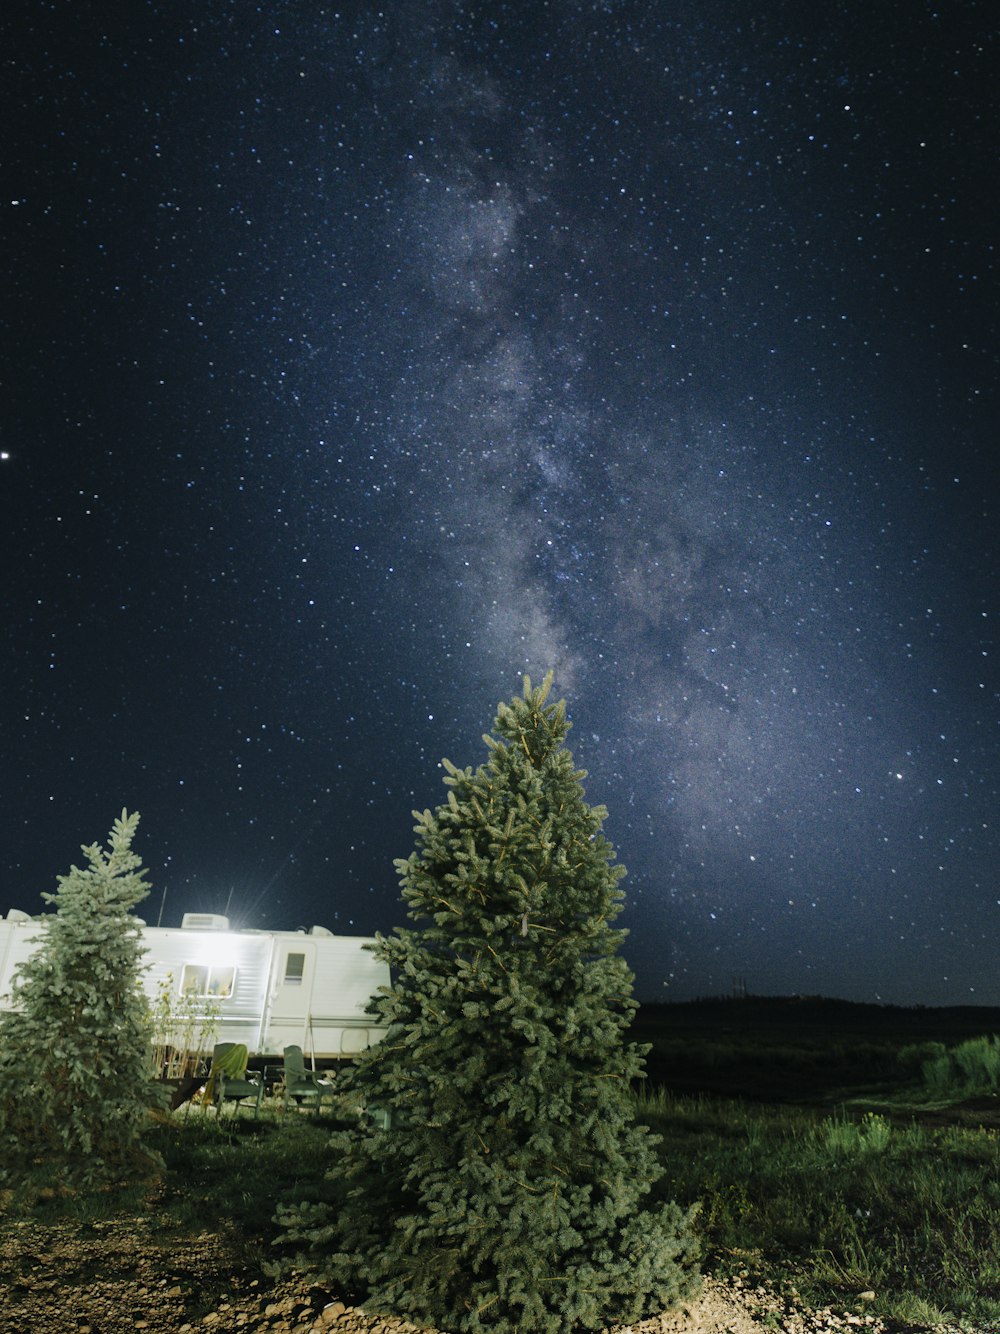 white house near green trees under starry night